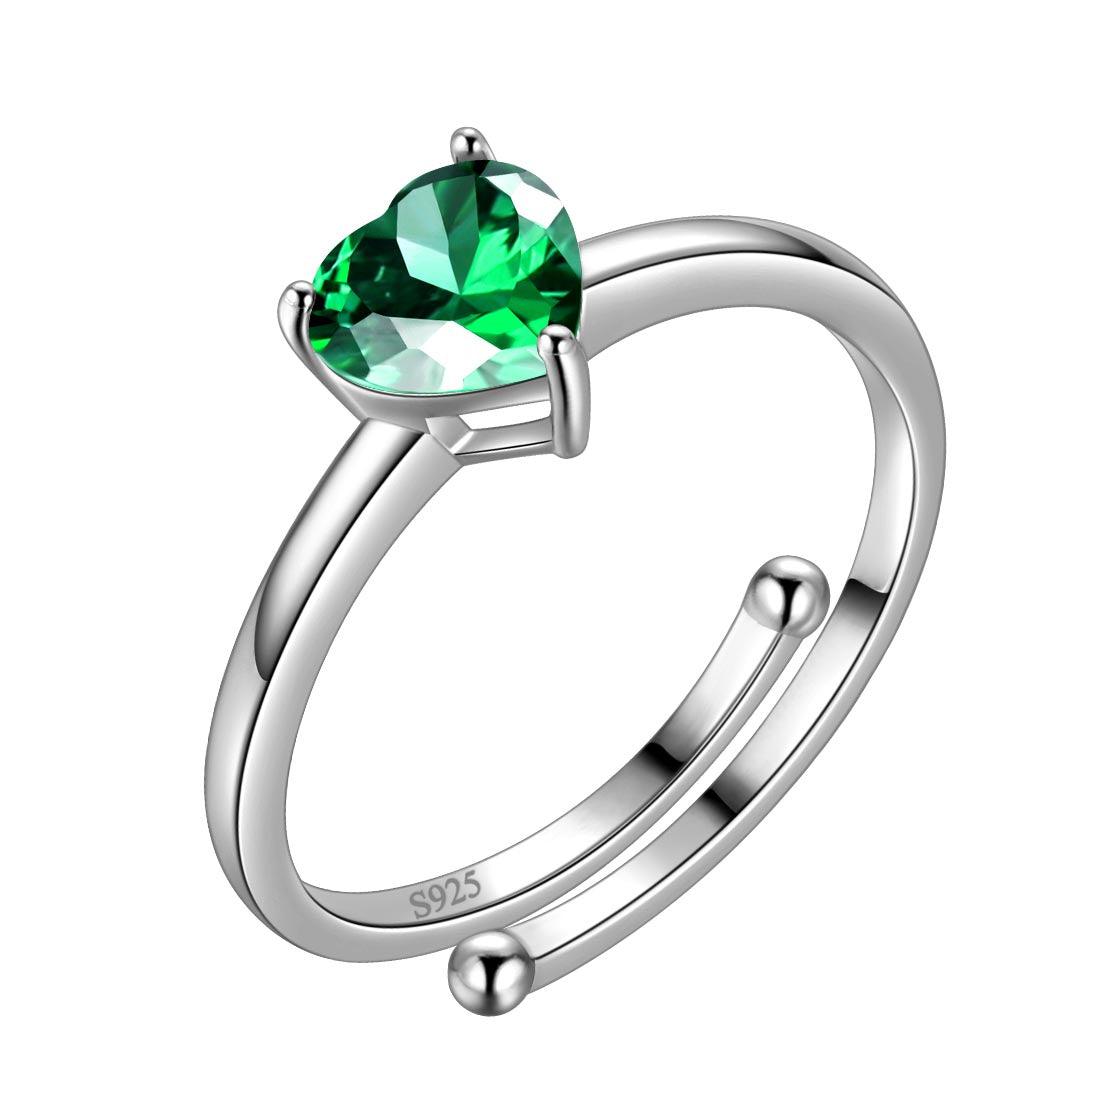 Buy Green Emerald Adjustable Silver Ring Online – The Jewelbox